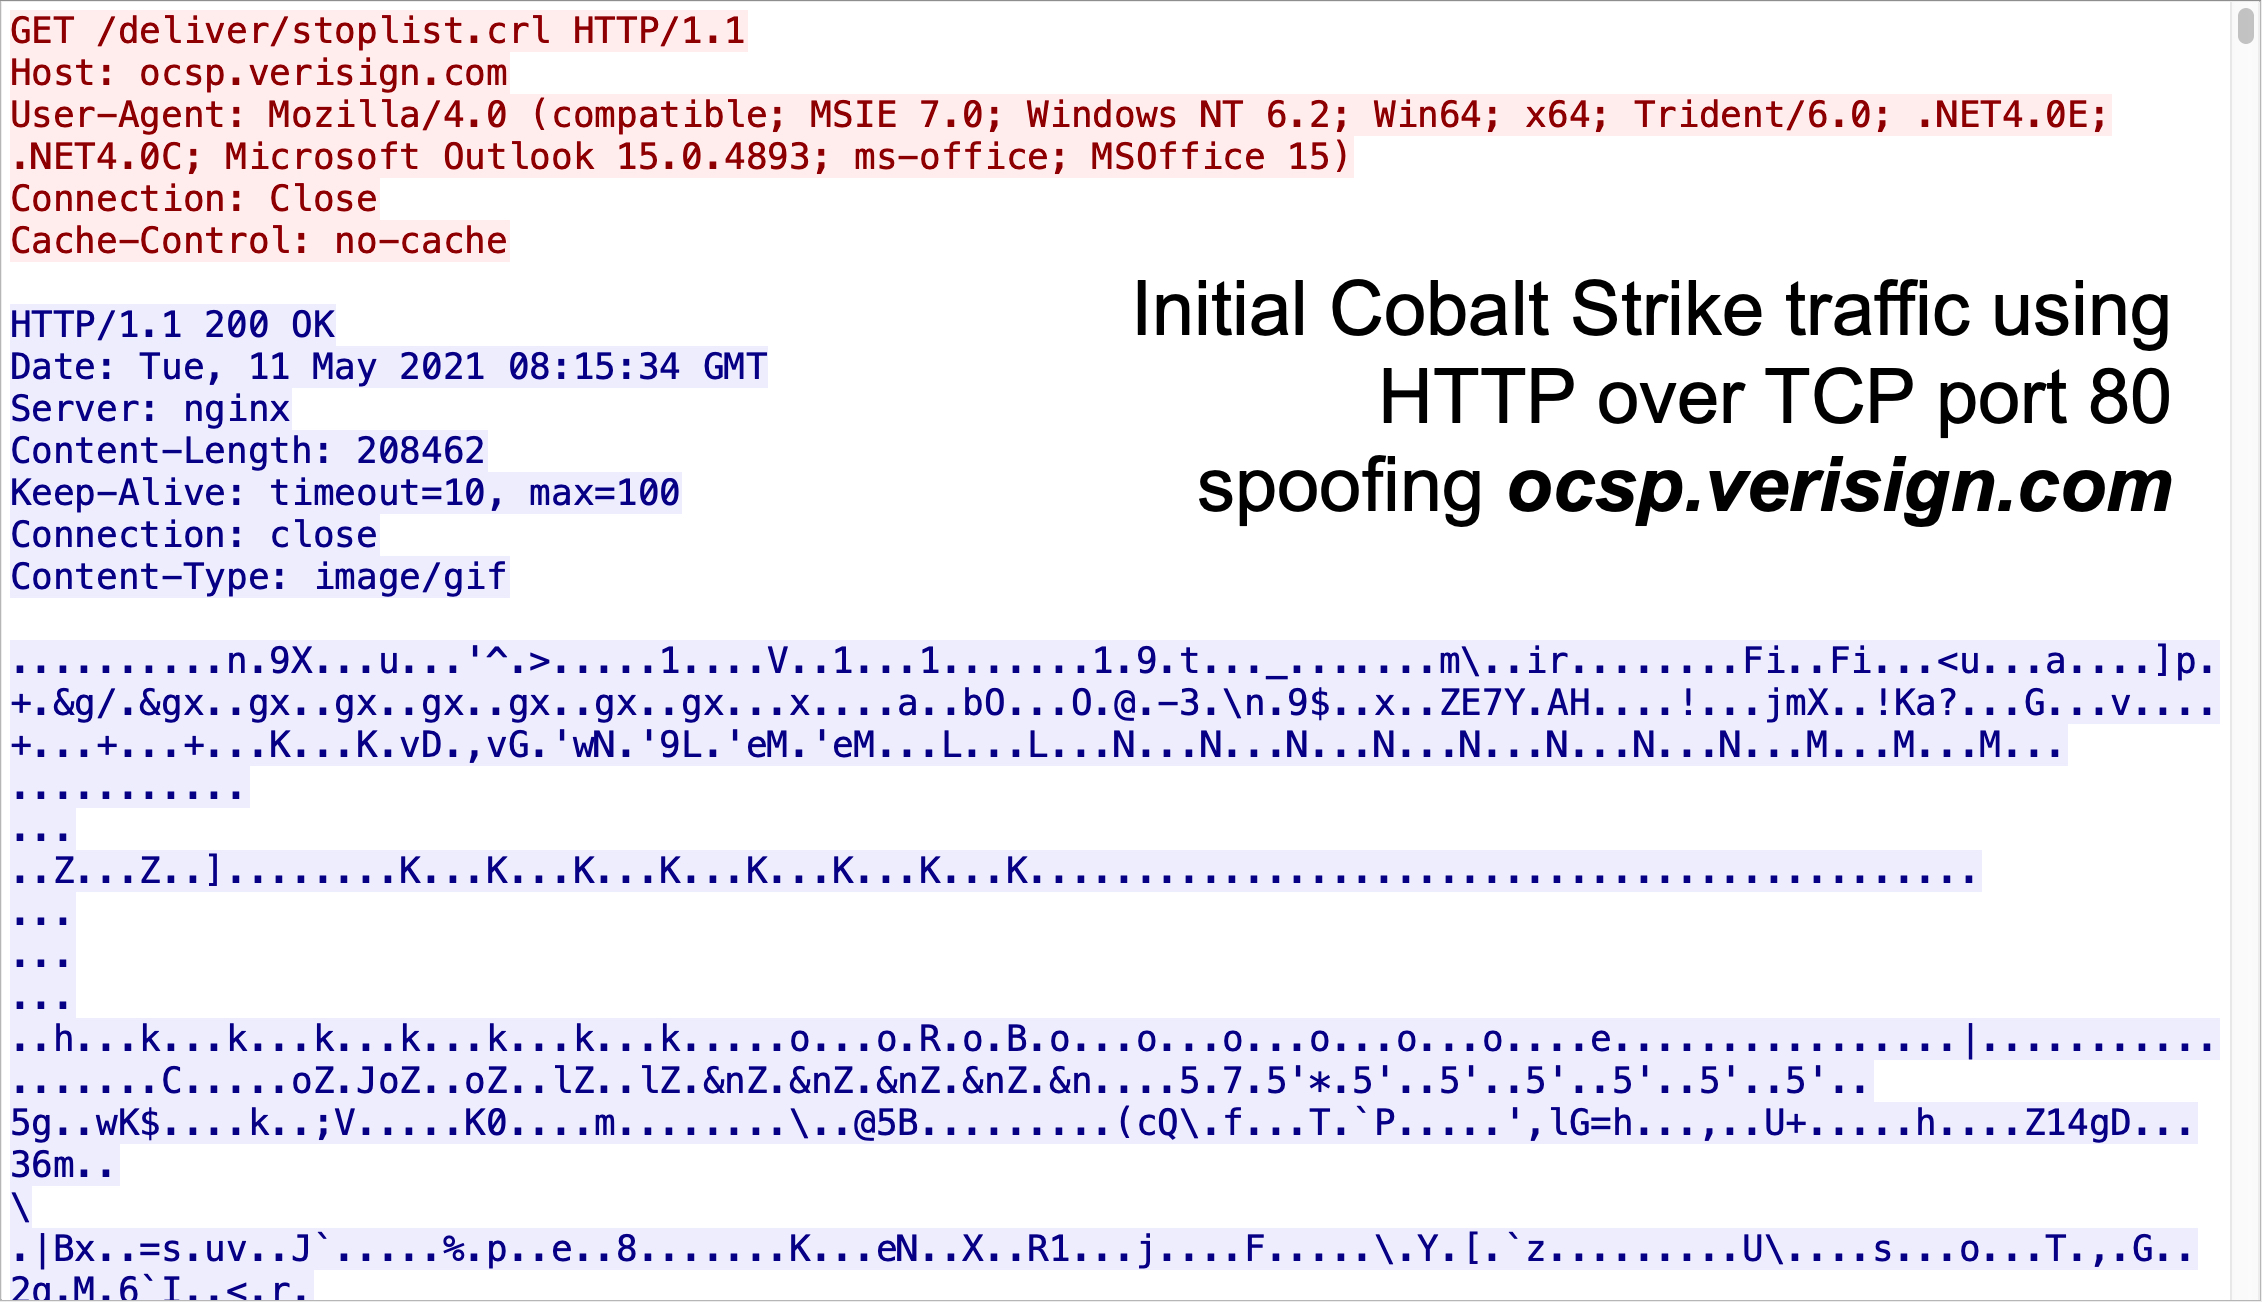 Unit 42 21 05 11 Tuesday Cobaltstrike Seen During Recent Qakbot Qbot Infection Cobalt Strike Domain Is Akastat App On 62 128 111 176 And It S Also Spoofing Legitimate Domain T Co Avpp3gjuia Com Using The Same Ip